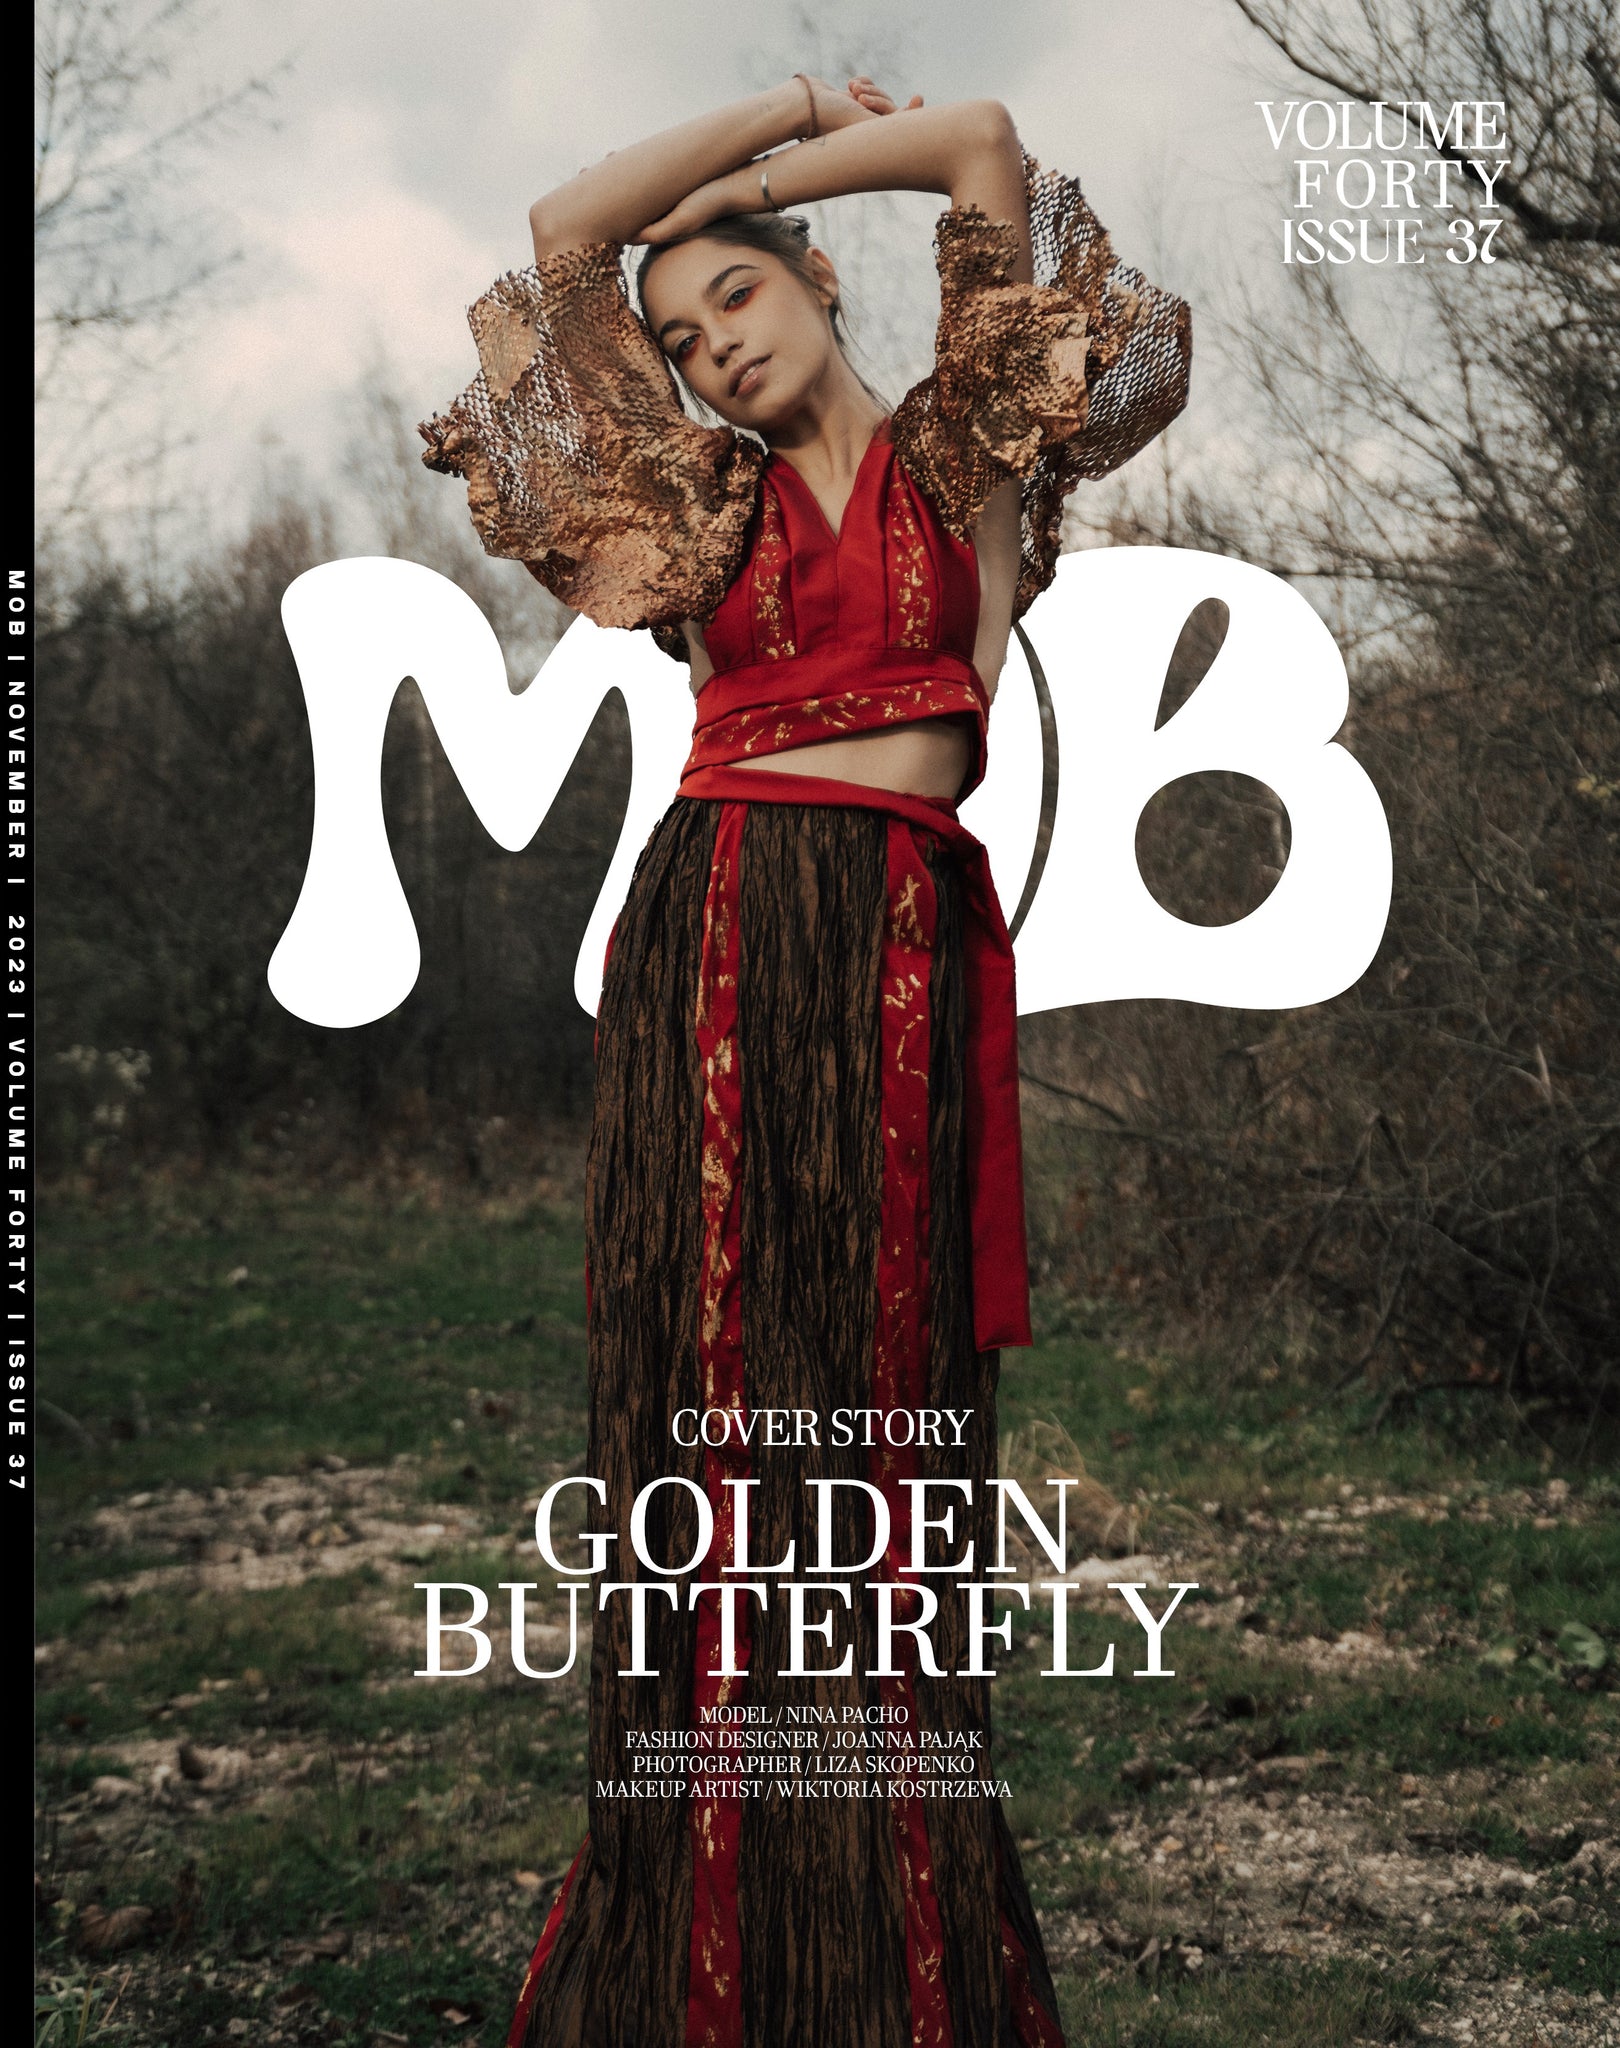 MOB JOURNAL | VOLUME FORTY | ISSUE #37